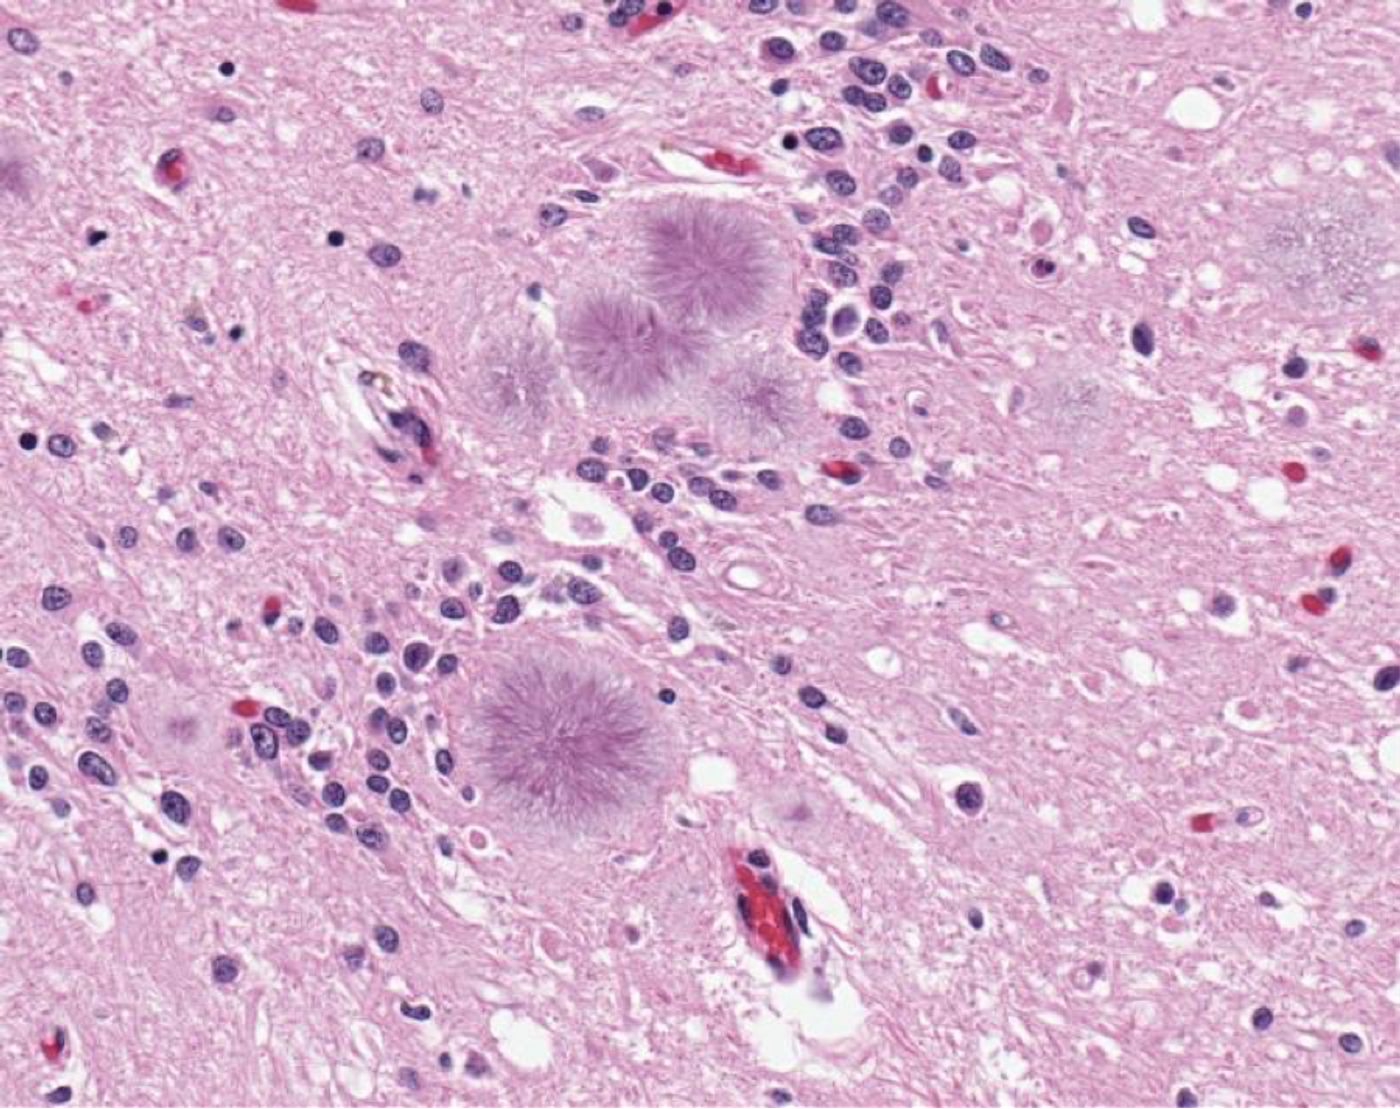 Histopathology of prion infection in the brain